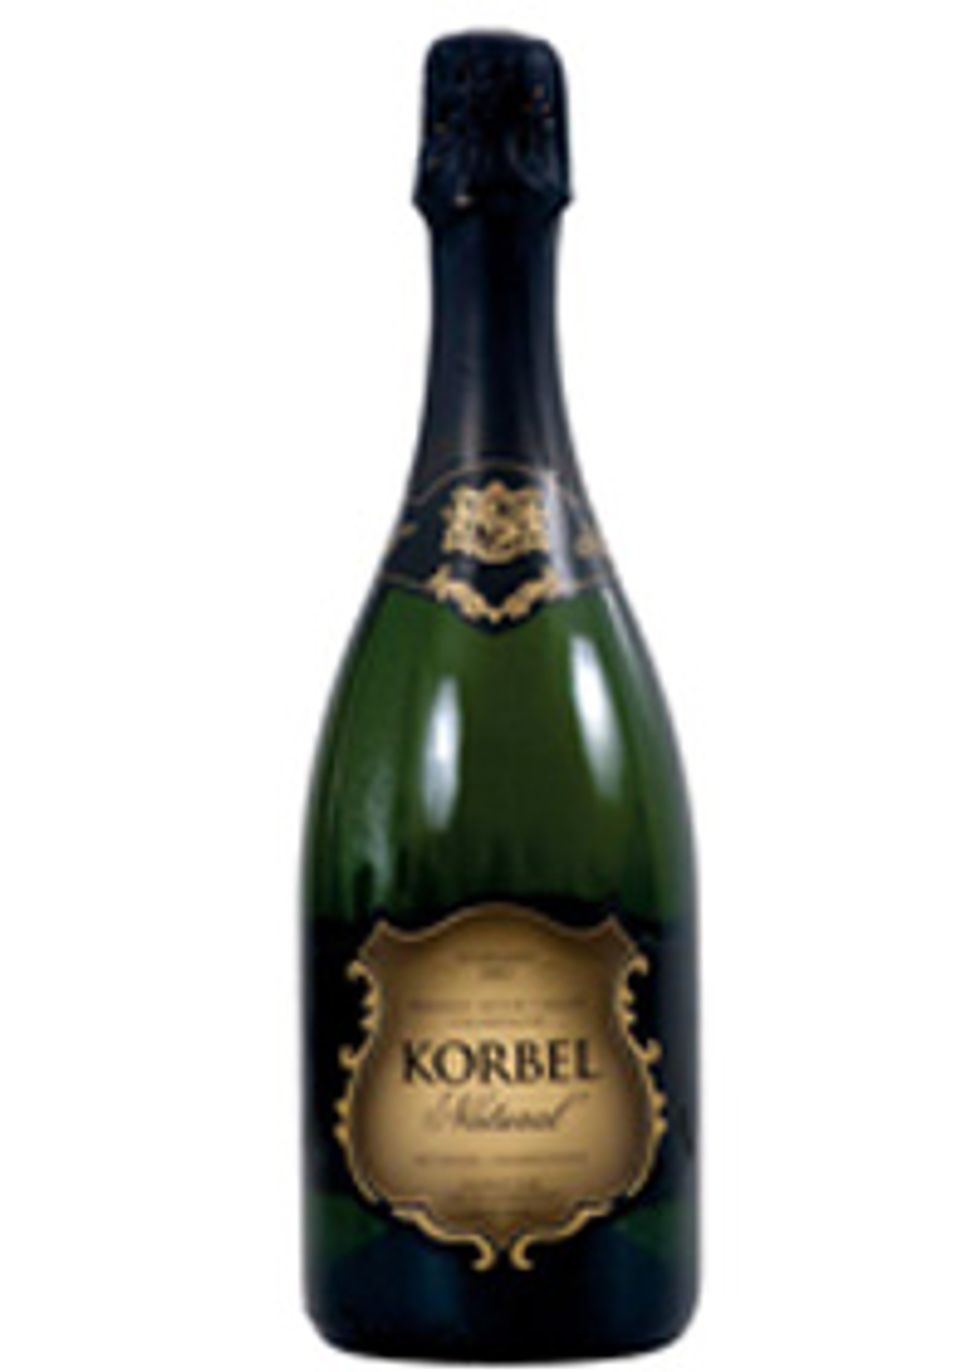 7x7's Wine Buying Guide: Korbel Champagne, Lake Sonoma Winery, Kenwood Vineyards, and Valley of the Moon Winery